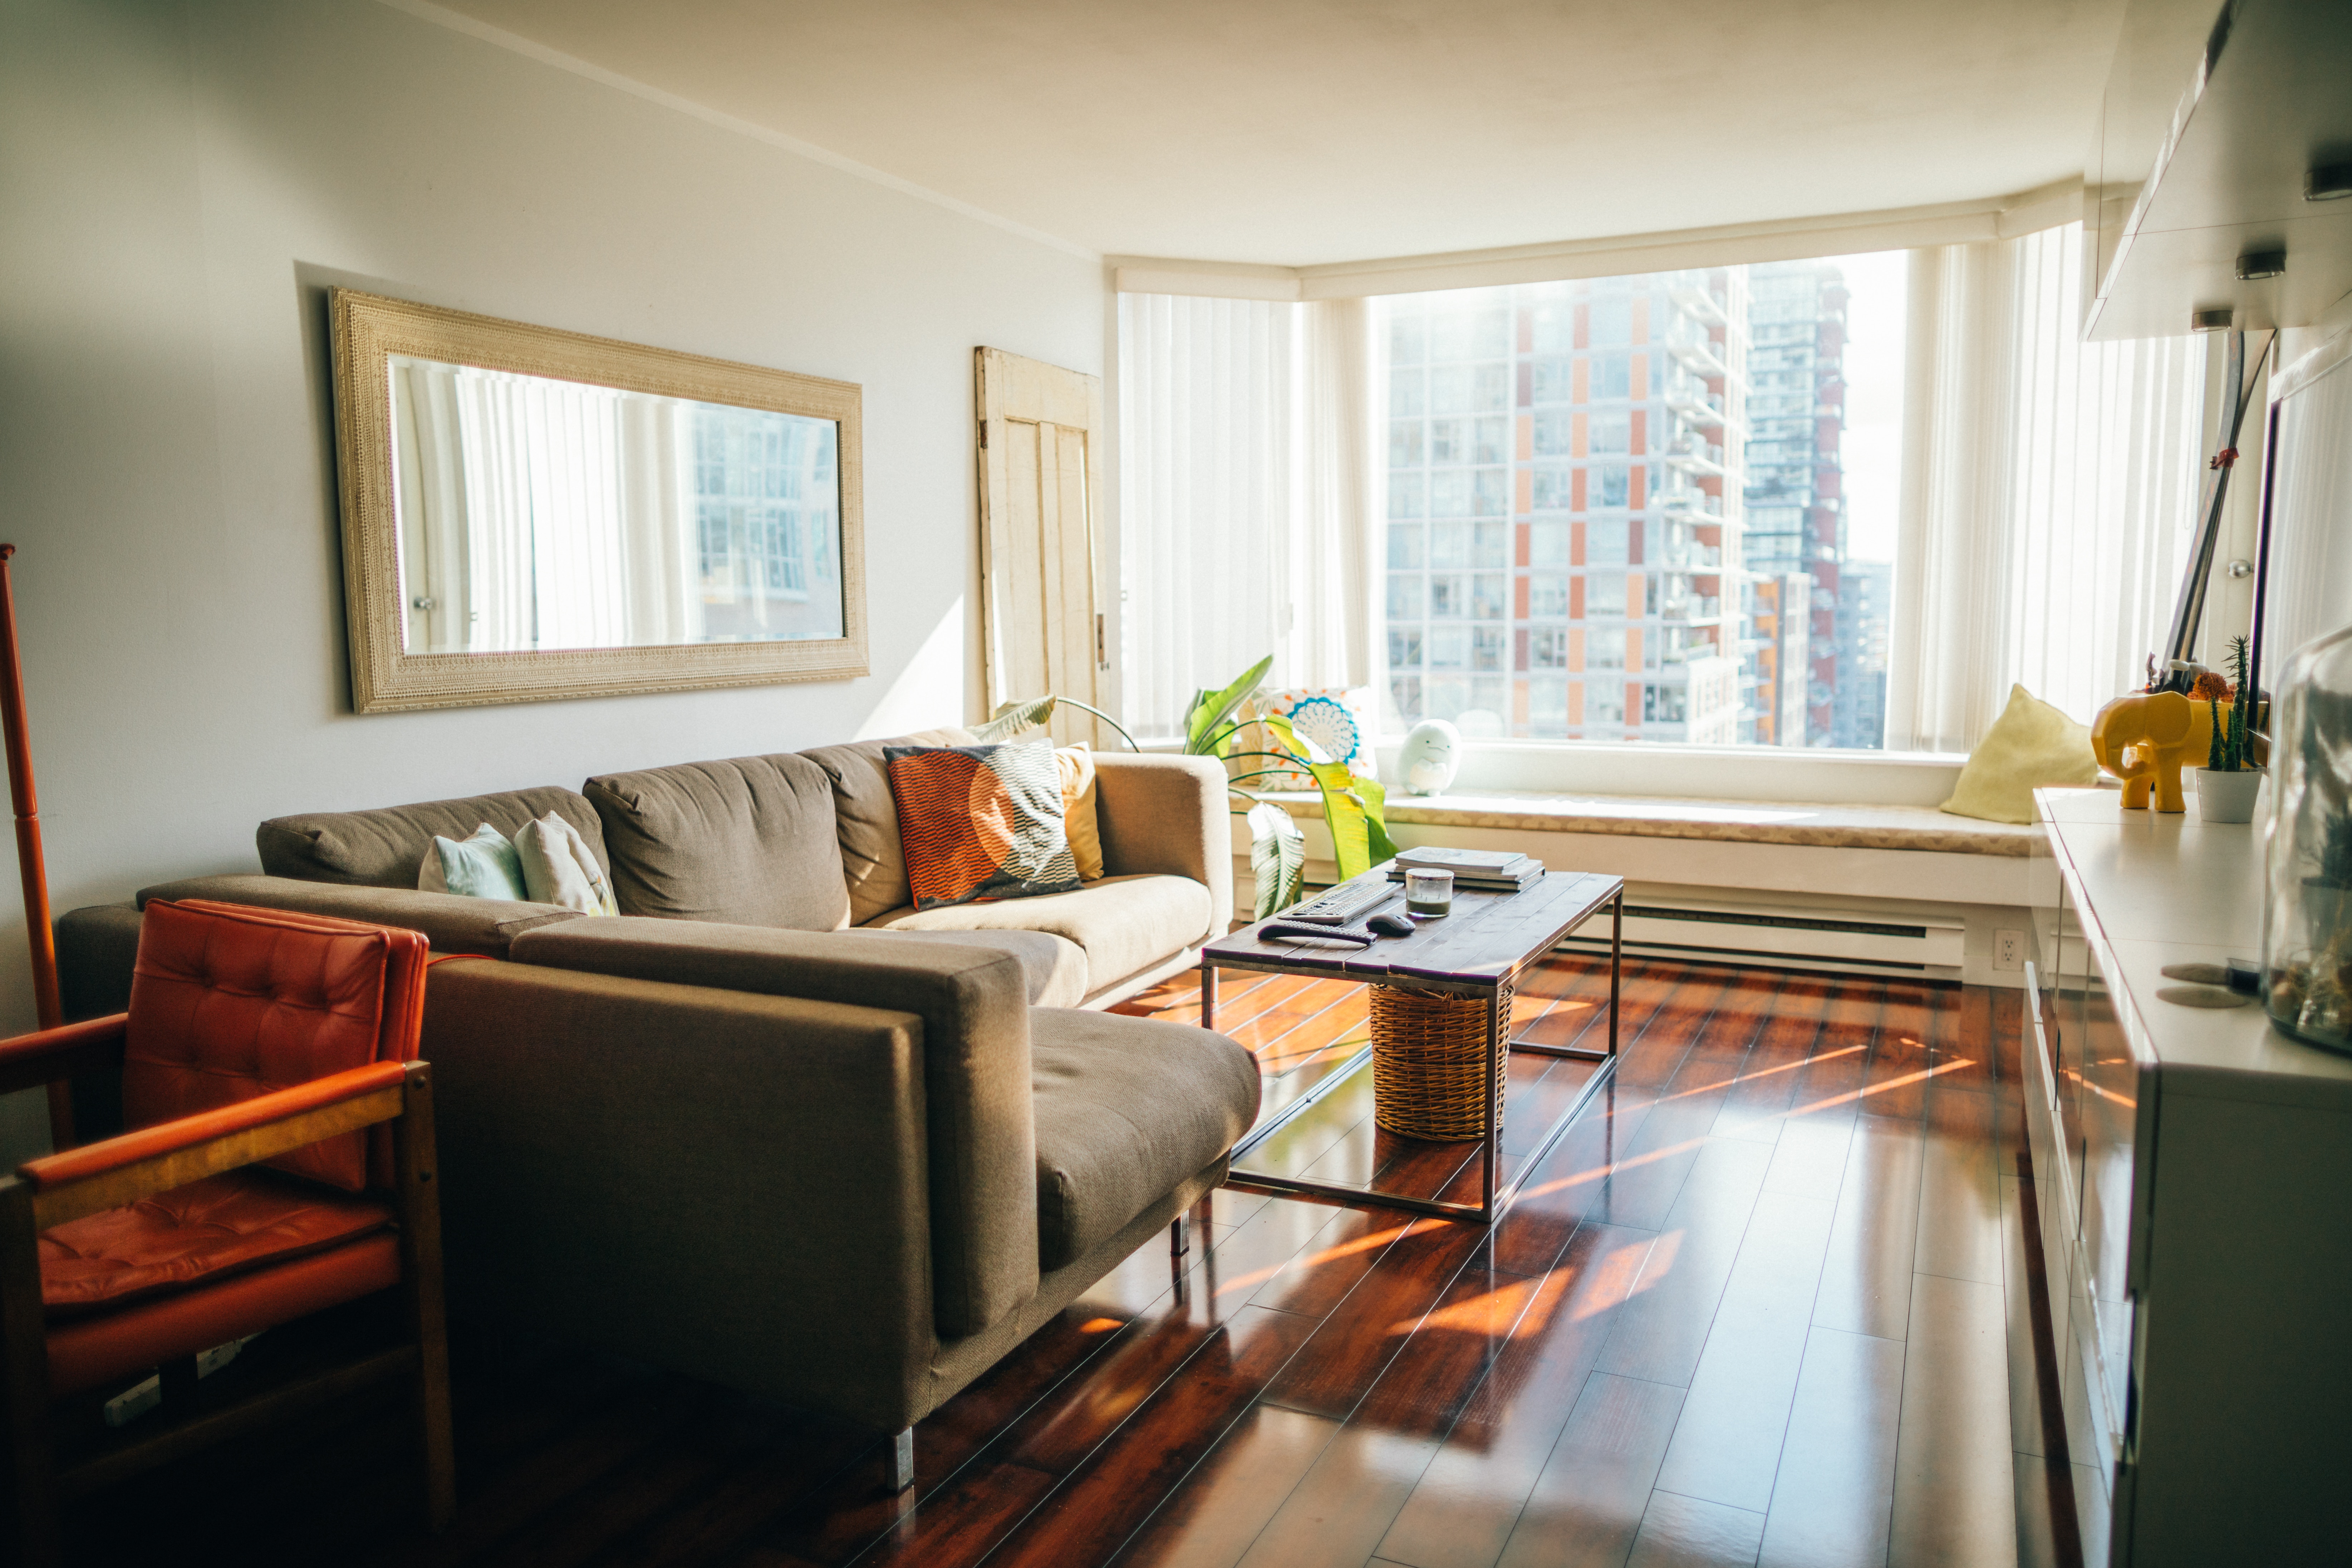 8 reasons why a condo is a great investment in Kitchener-Waterloo